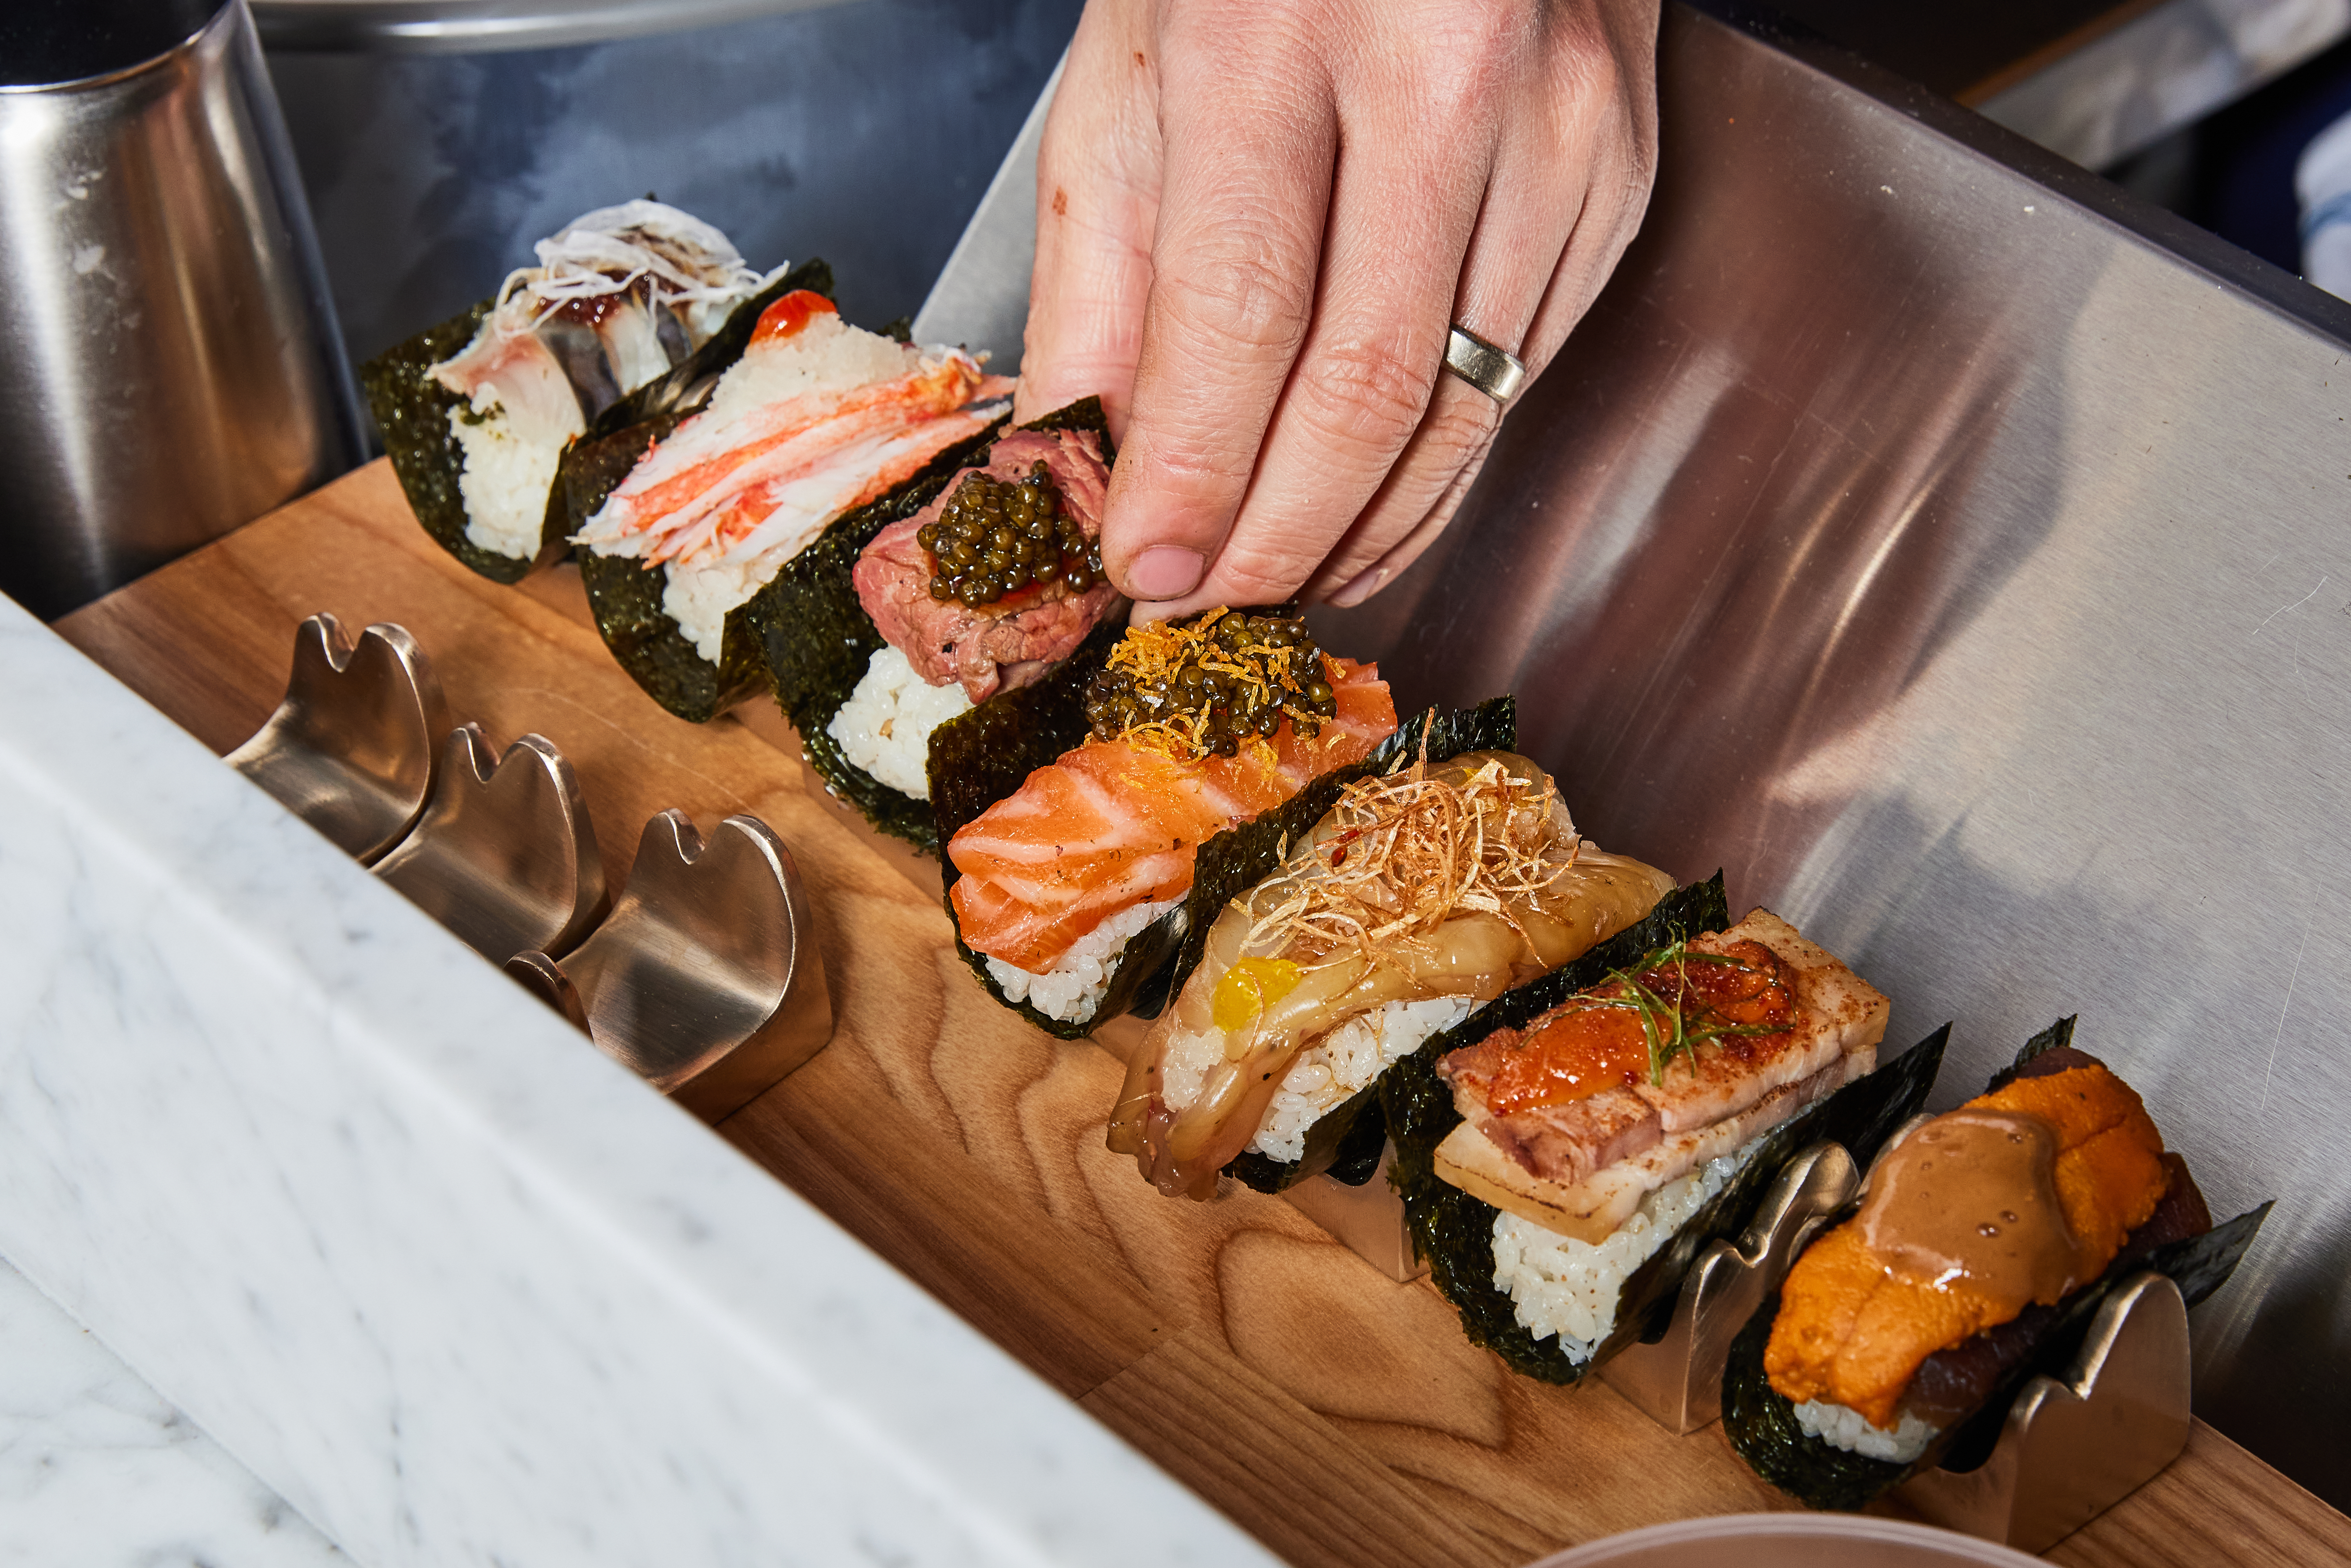 Several handrolls are lined up on a wooden base as a hand reaches in.